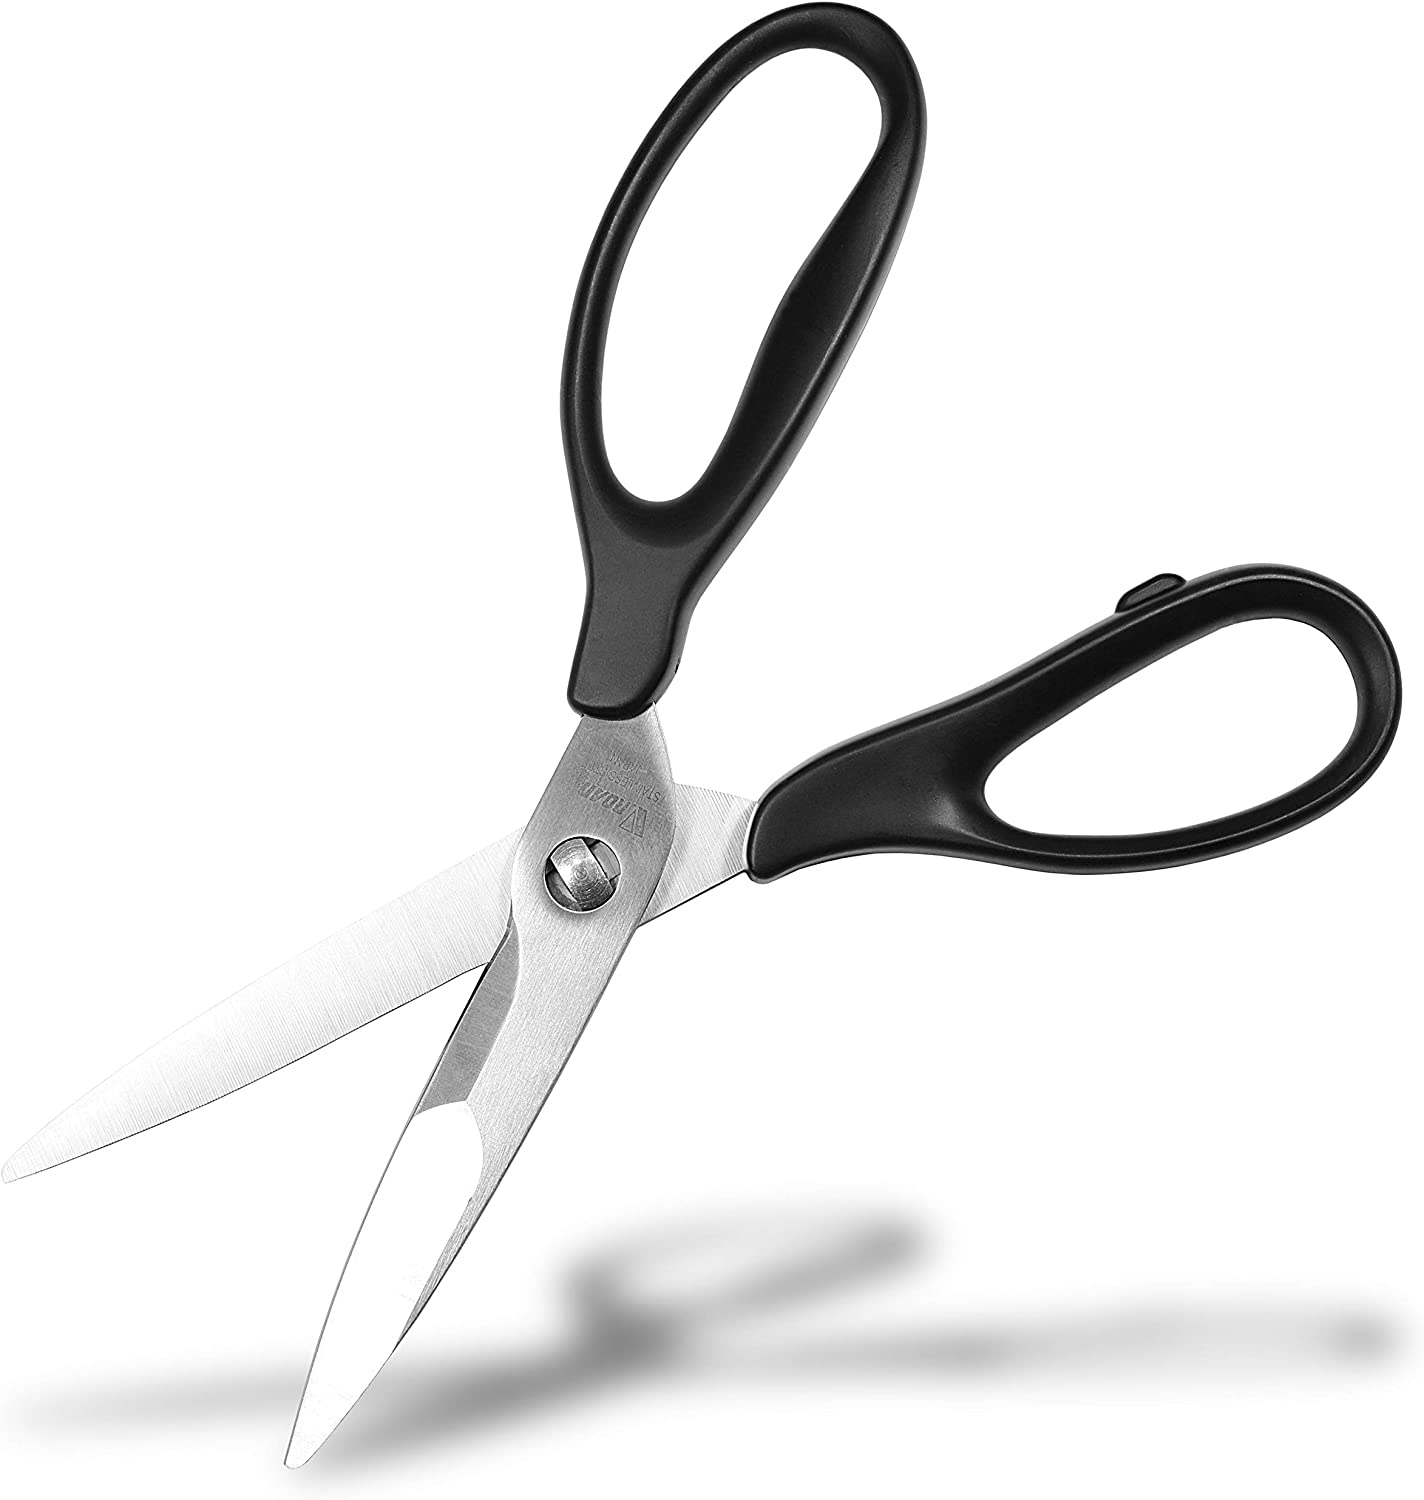 Silky Stainless Steel Office Scissors 6.7 inch NBS-170